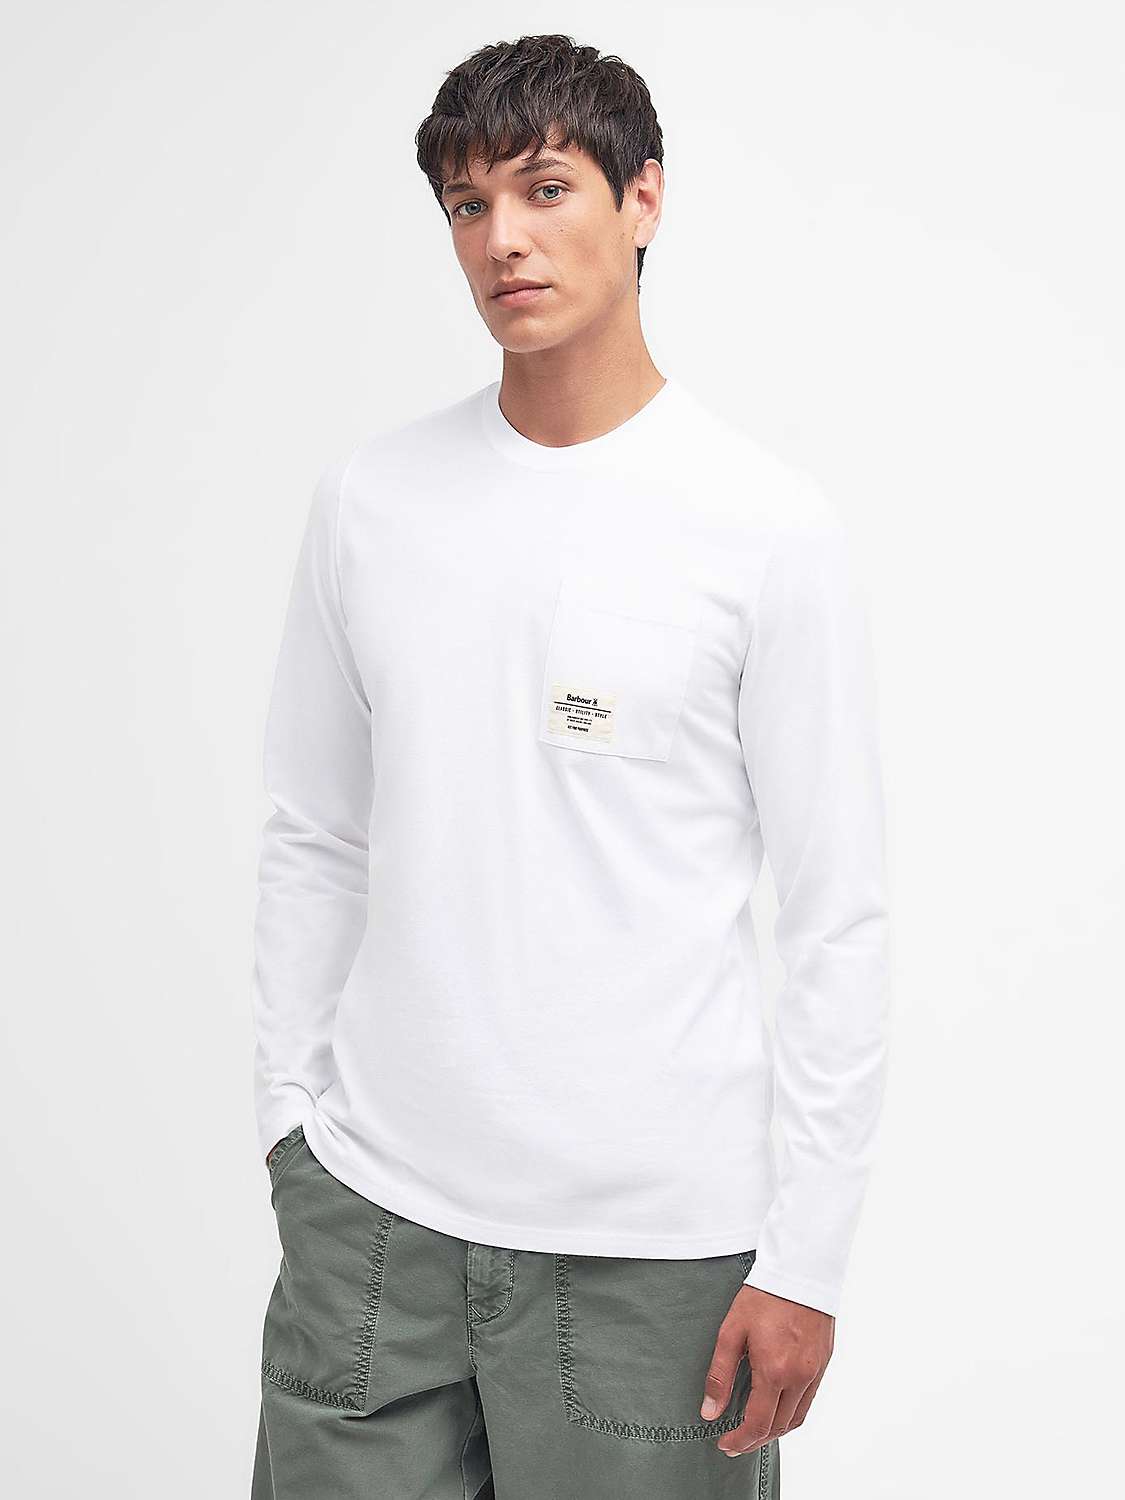 Buy Barbour Holbeck Long Sleeve T-Shirt, White Online at johnlewis.com